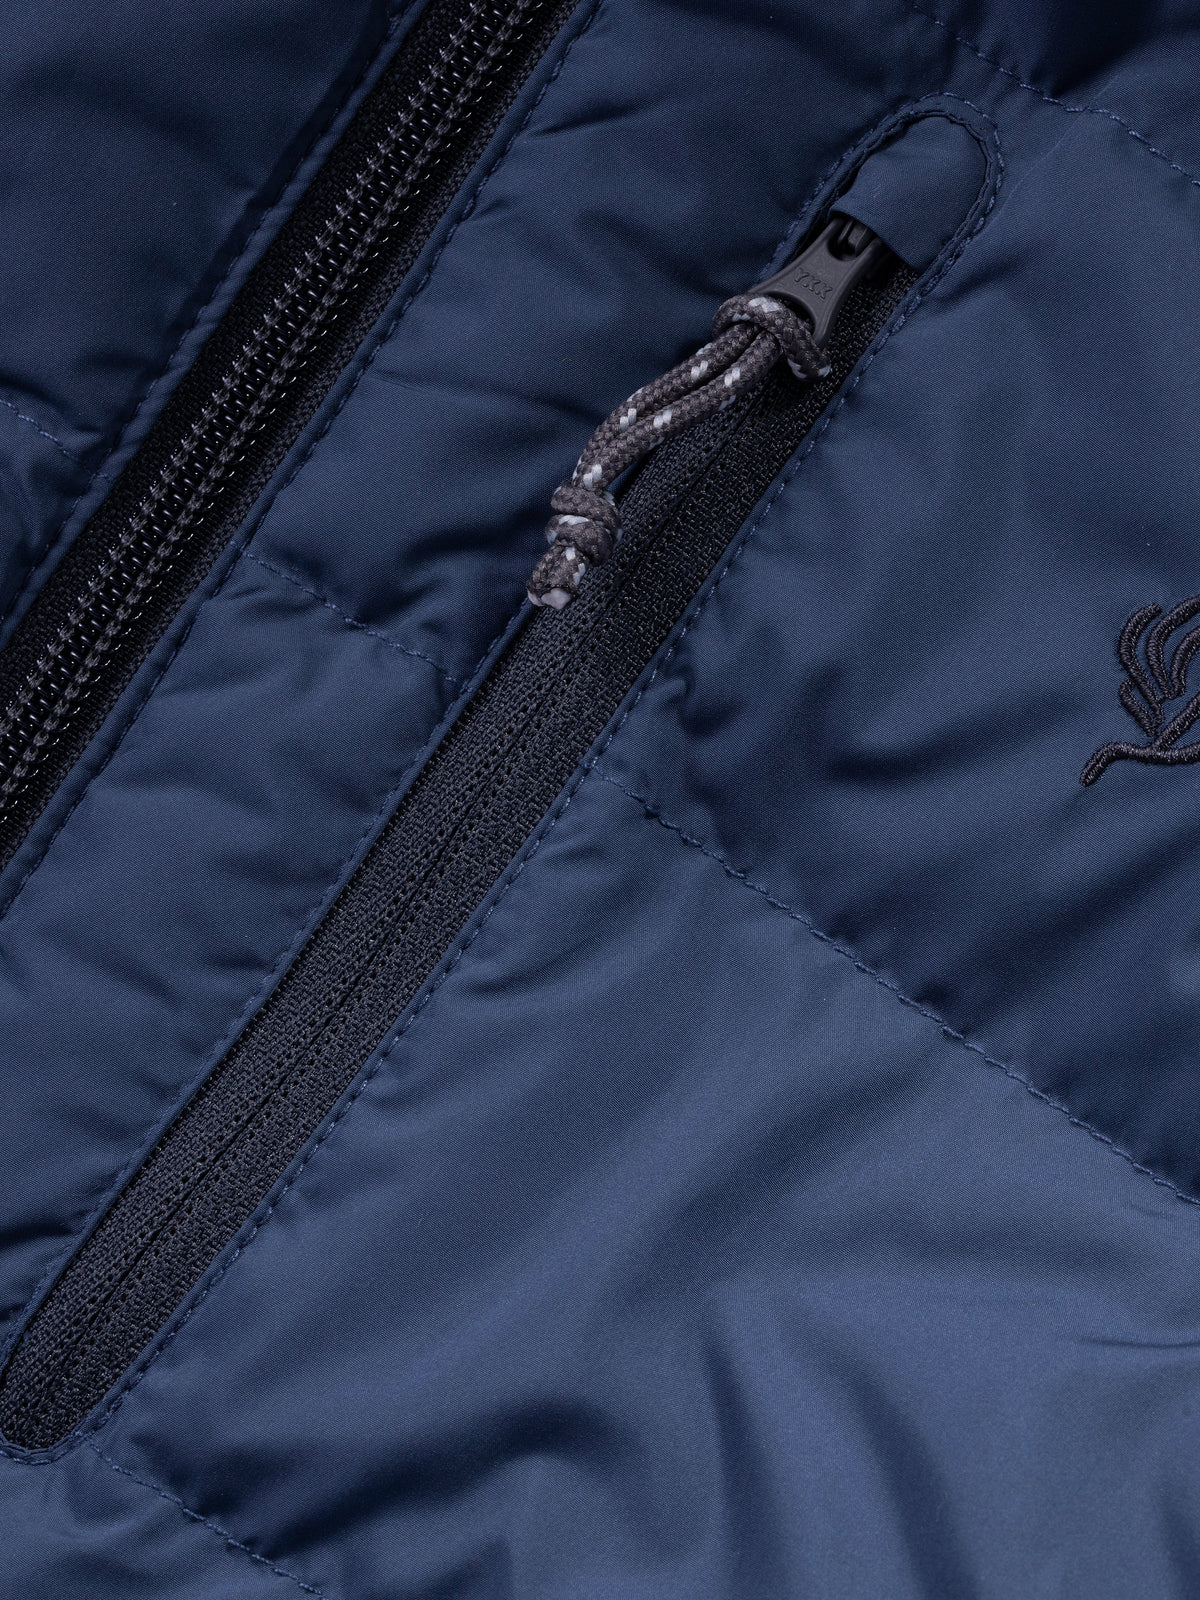 DryDown Reversible Jacket  - Charcoal/Faded Navy